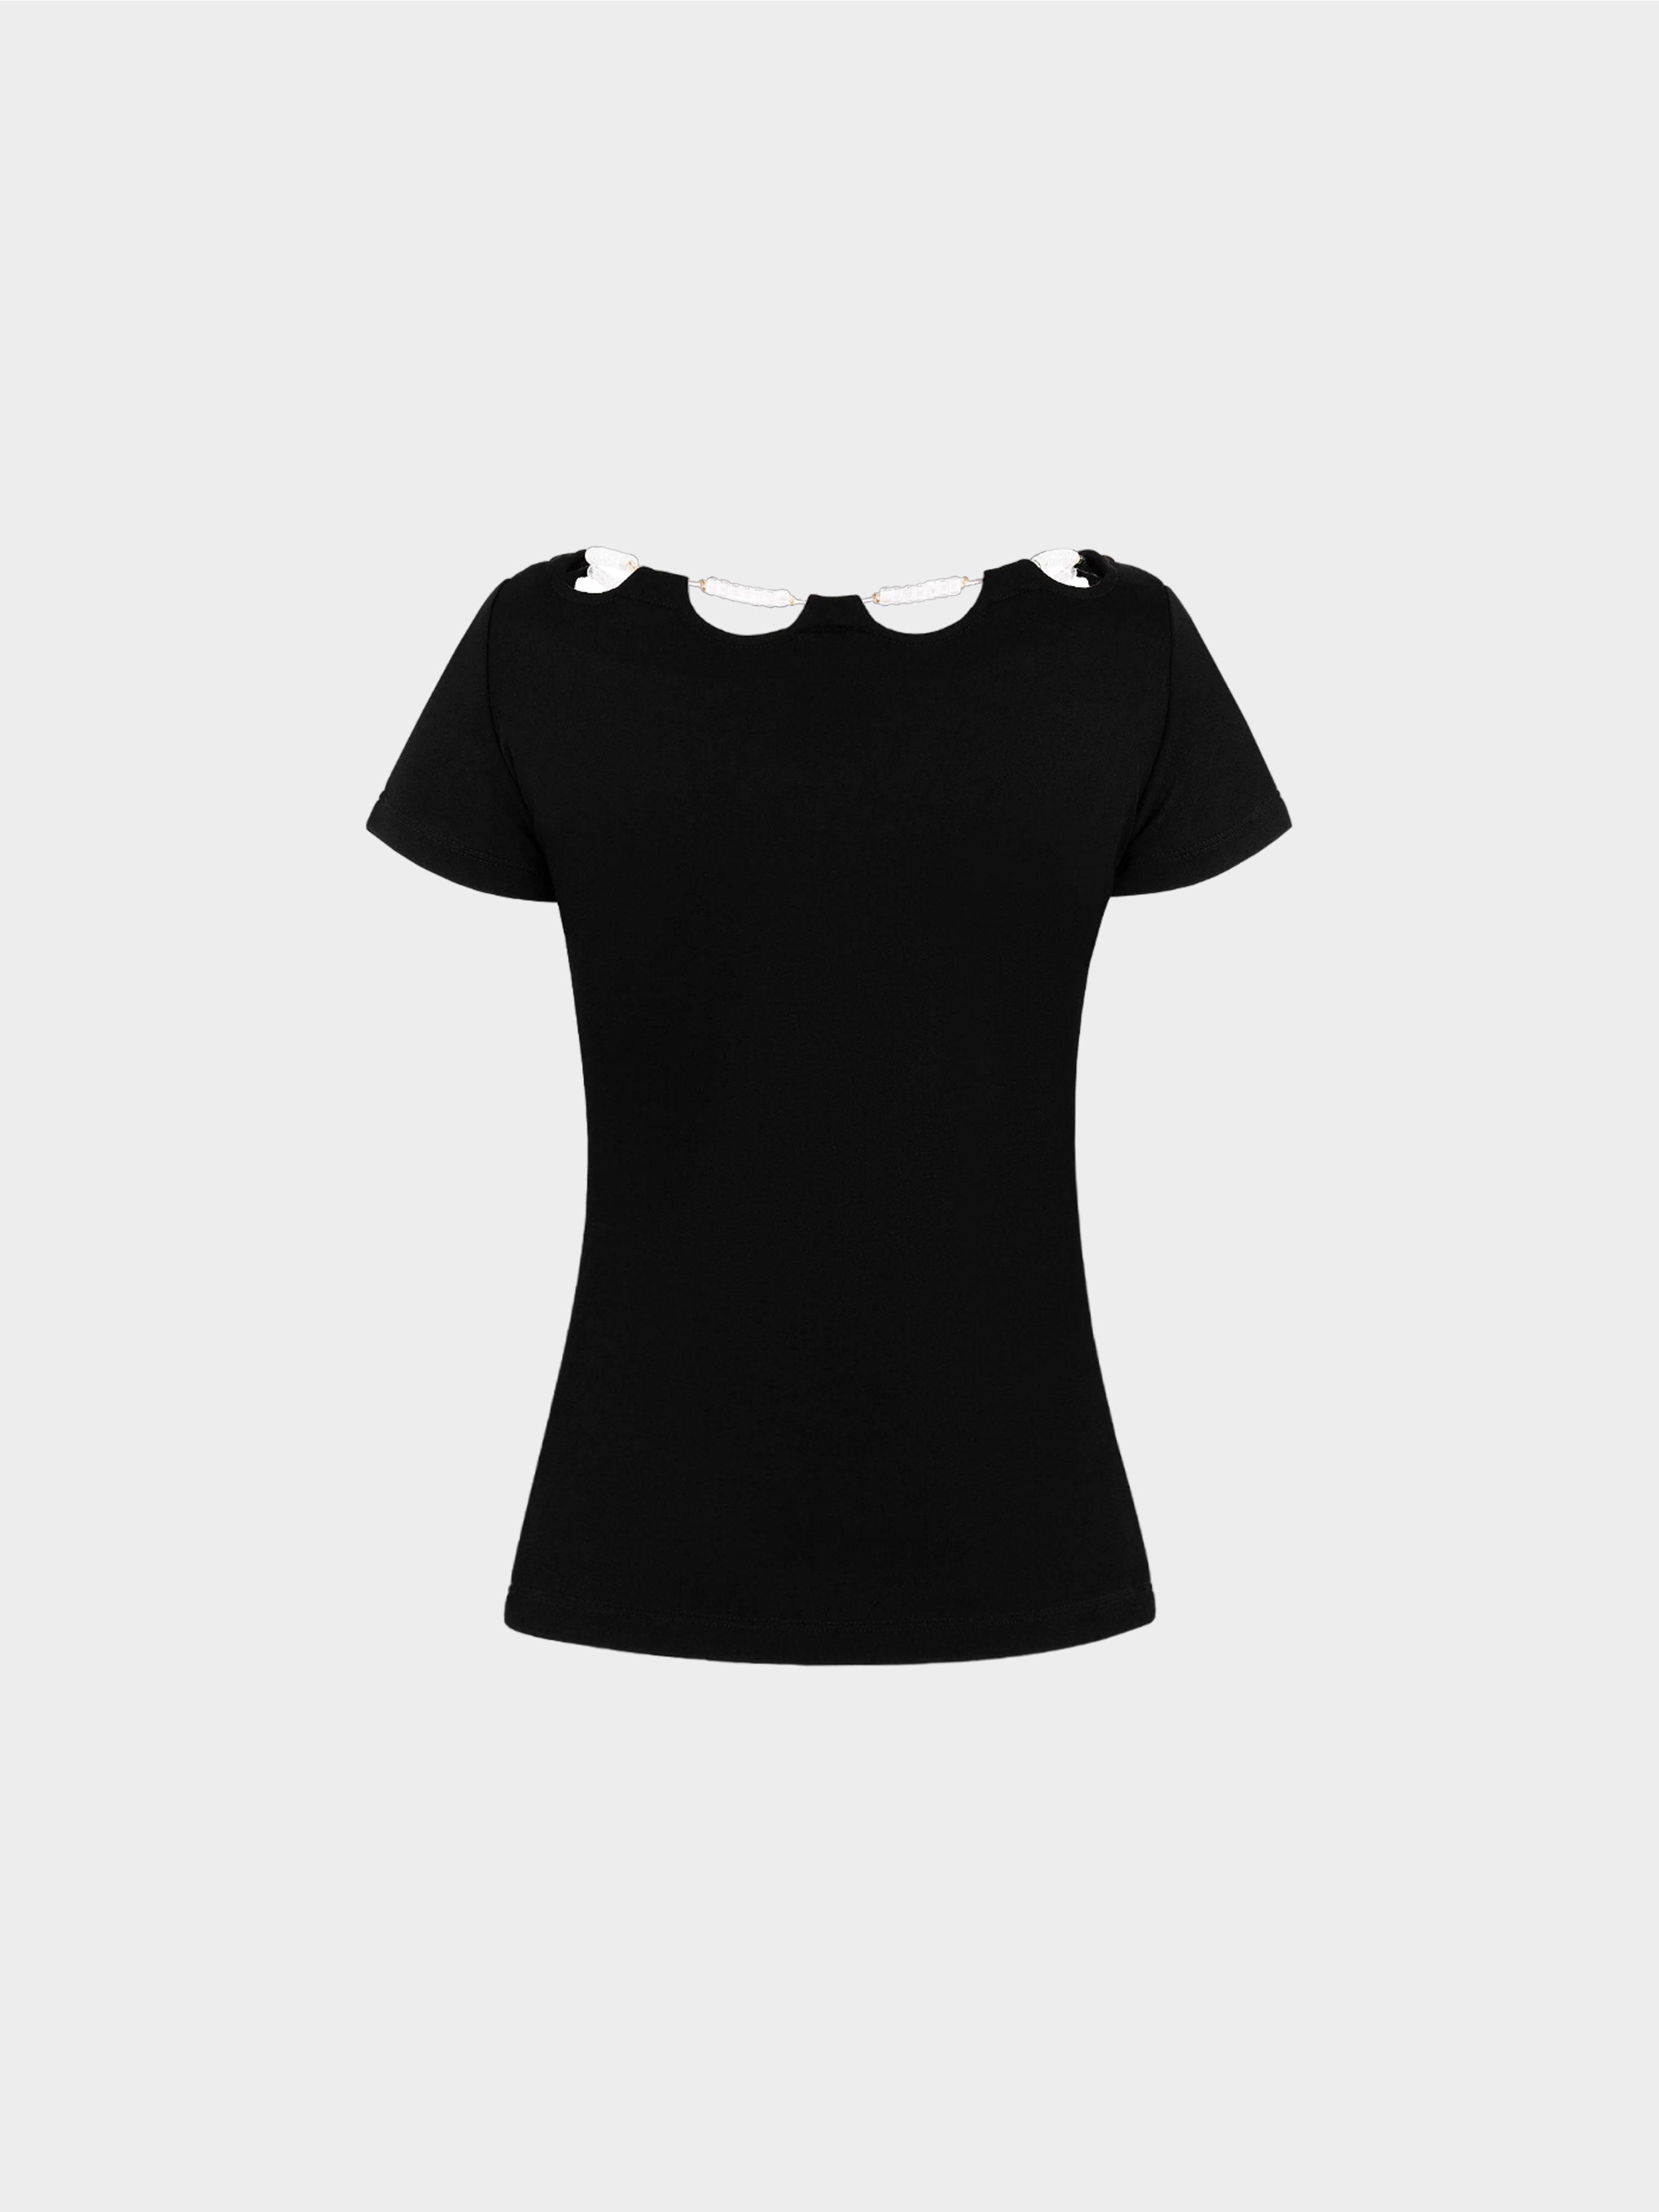 Moschino Cheap and Chic 1990s Black Top with Beads